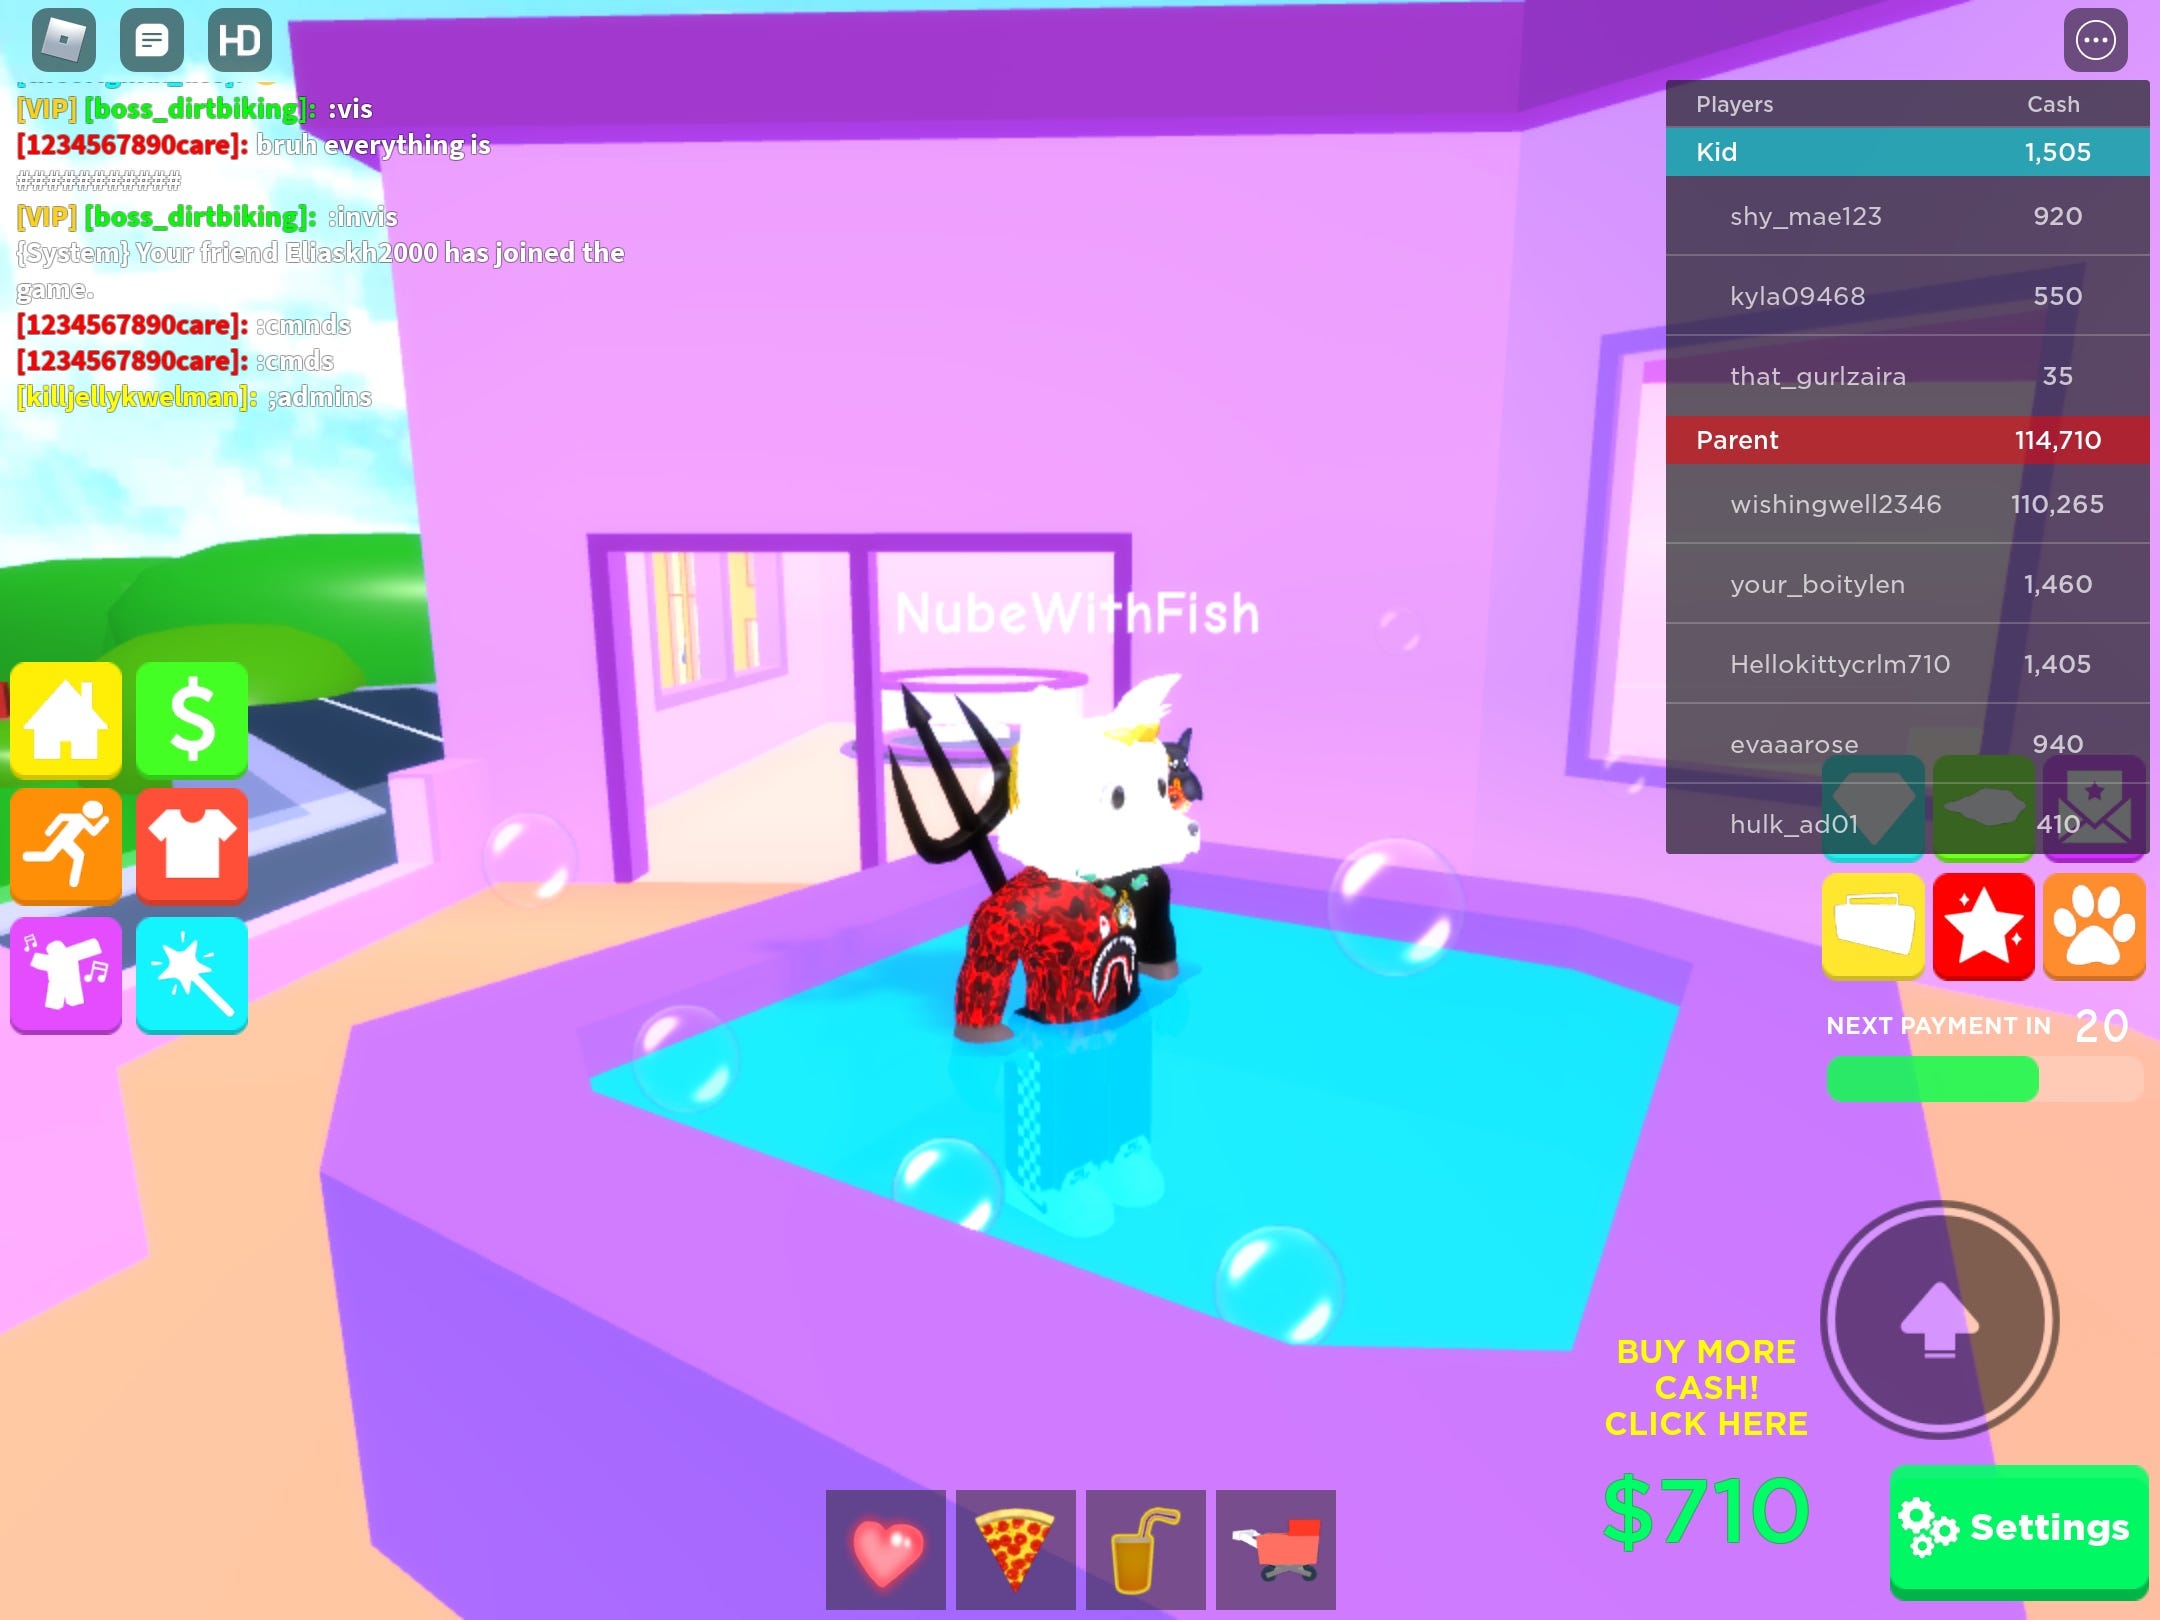 Top 5 Role Playing Games On Roblox By Superchicky Sep 2020 Medium - roblox jailbreak old map